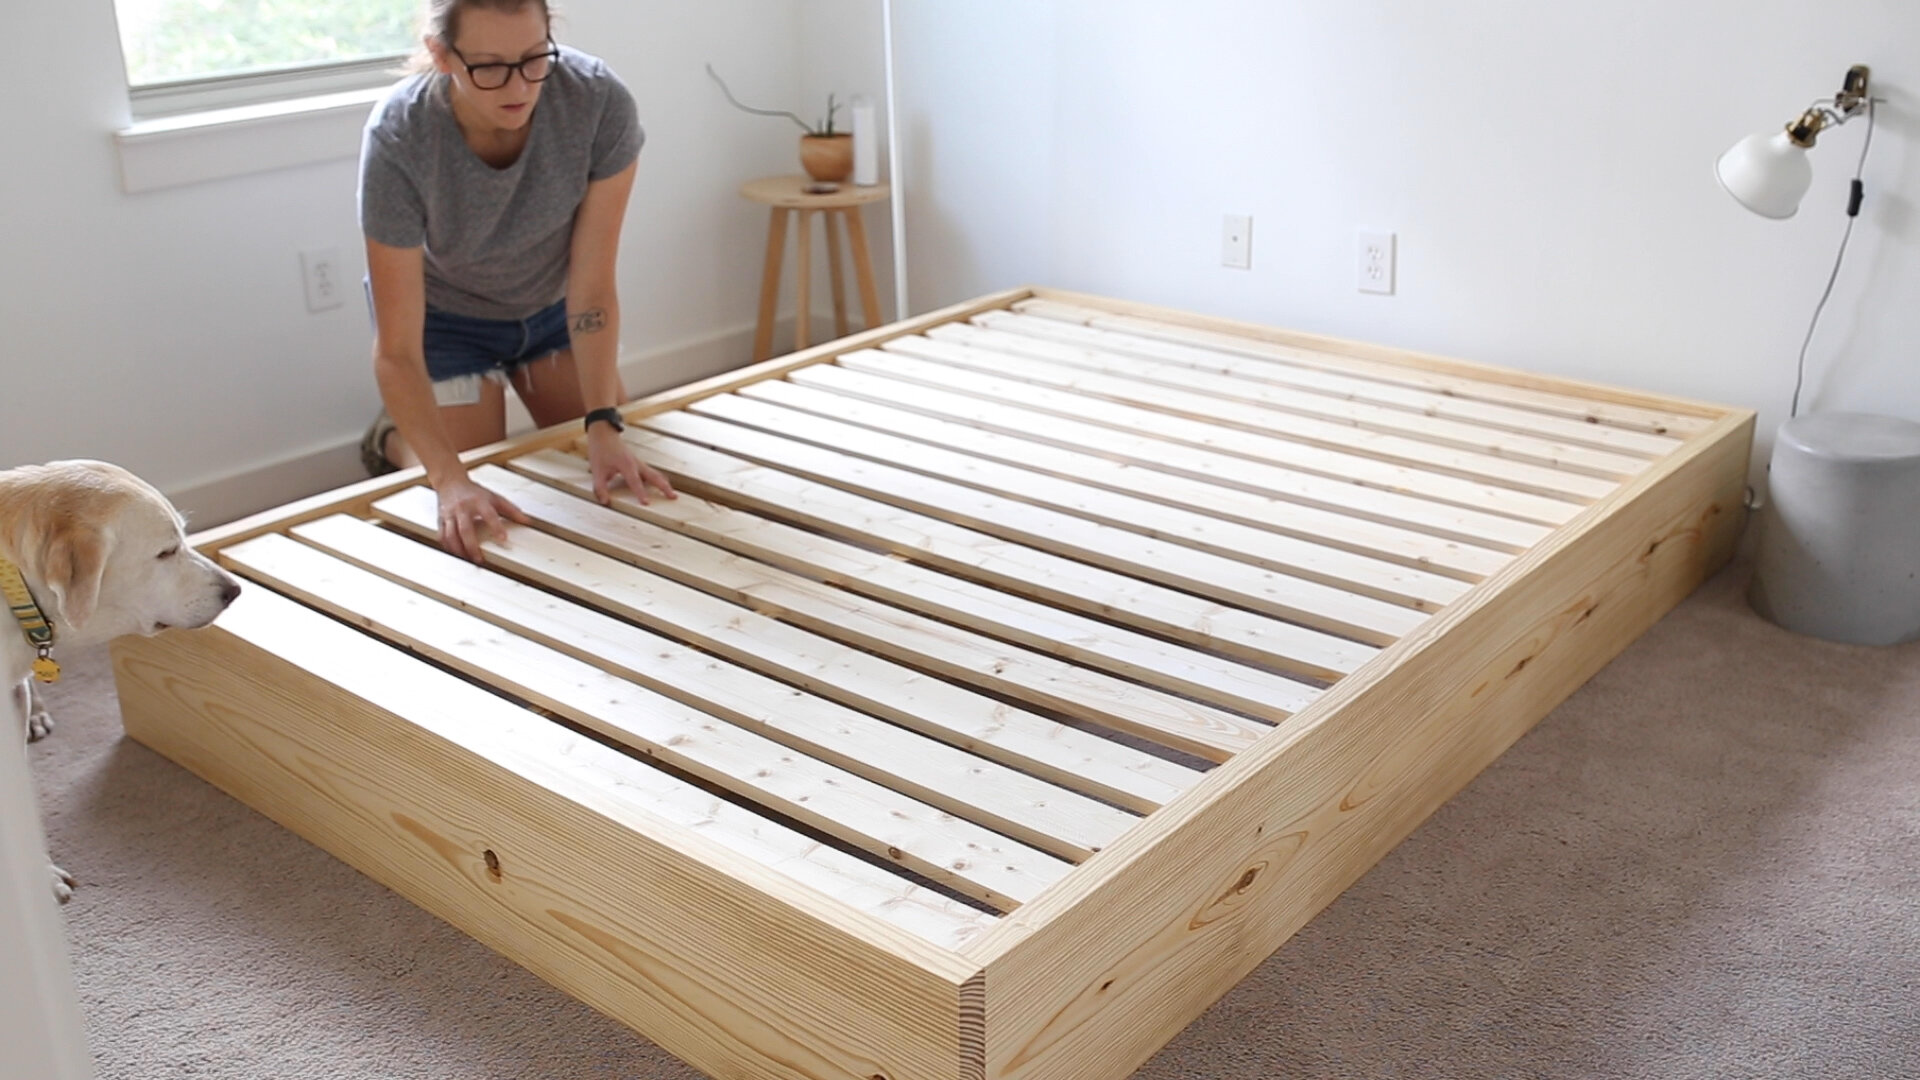 How To Build An Easy Bed Platform, Tatami Bed Frame Plans Pdf